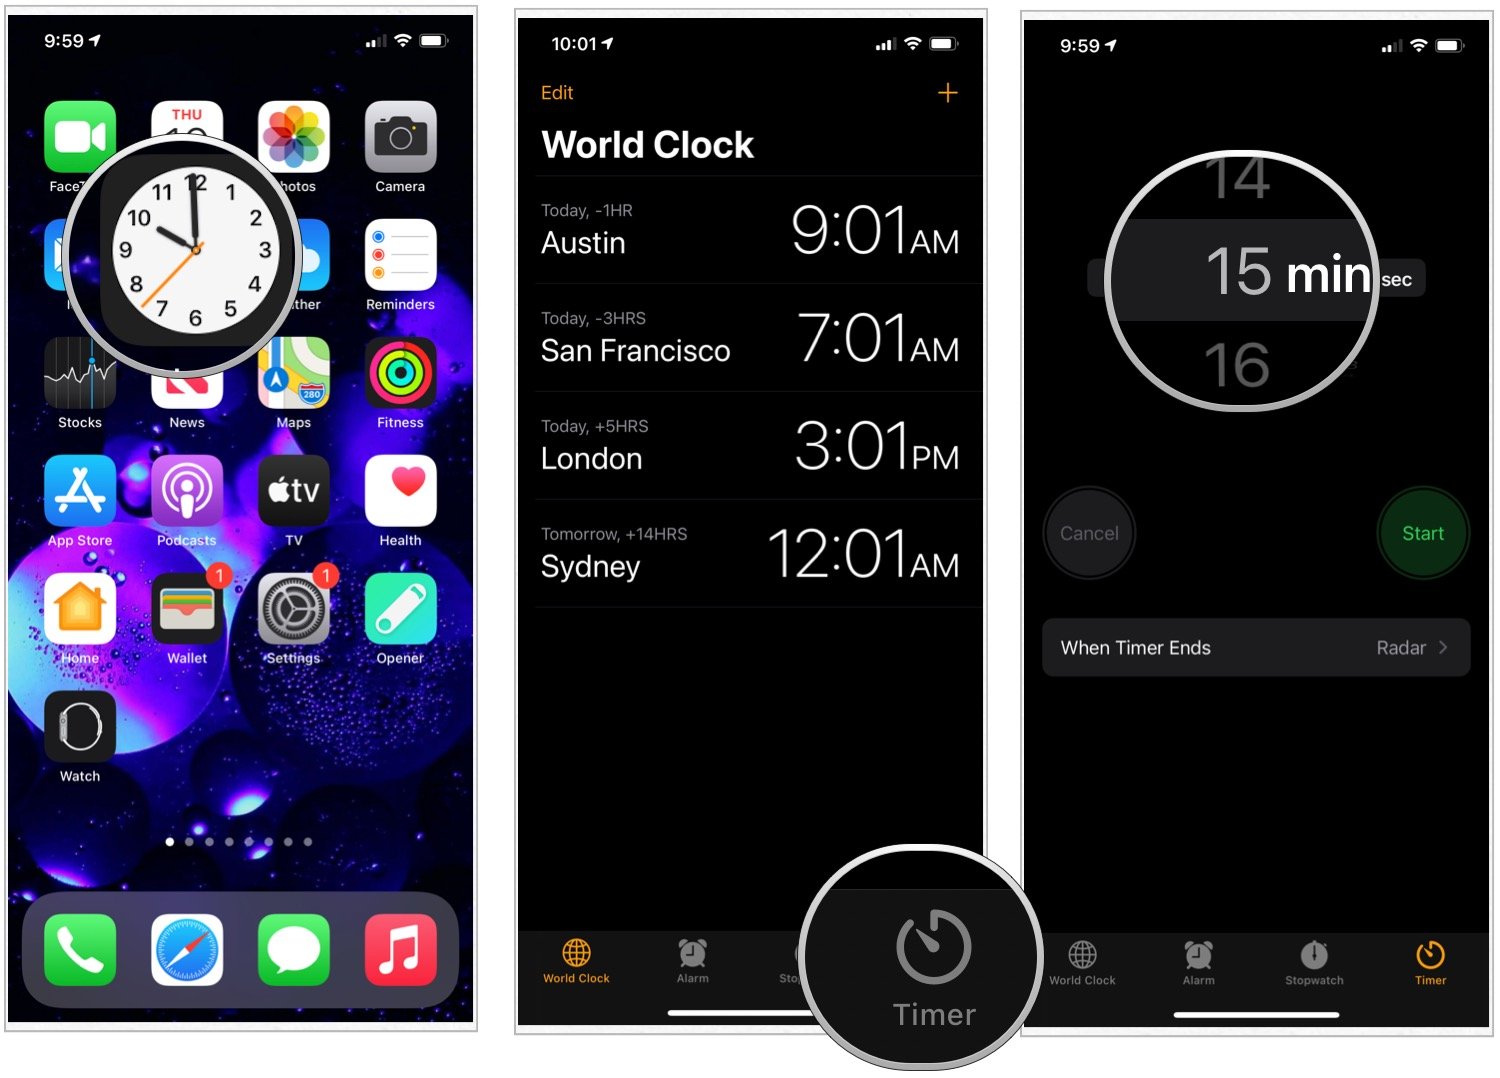 To set a timer on your mobile device, launch the Clock app from the Home screen. Tap the Timer tab. Use the picker to set the amount of time you want to let the music , then tap When Time Ends.